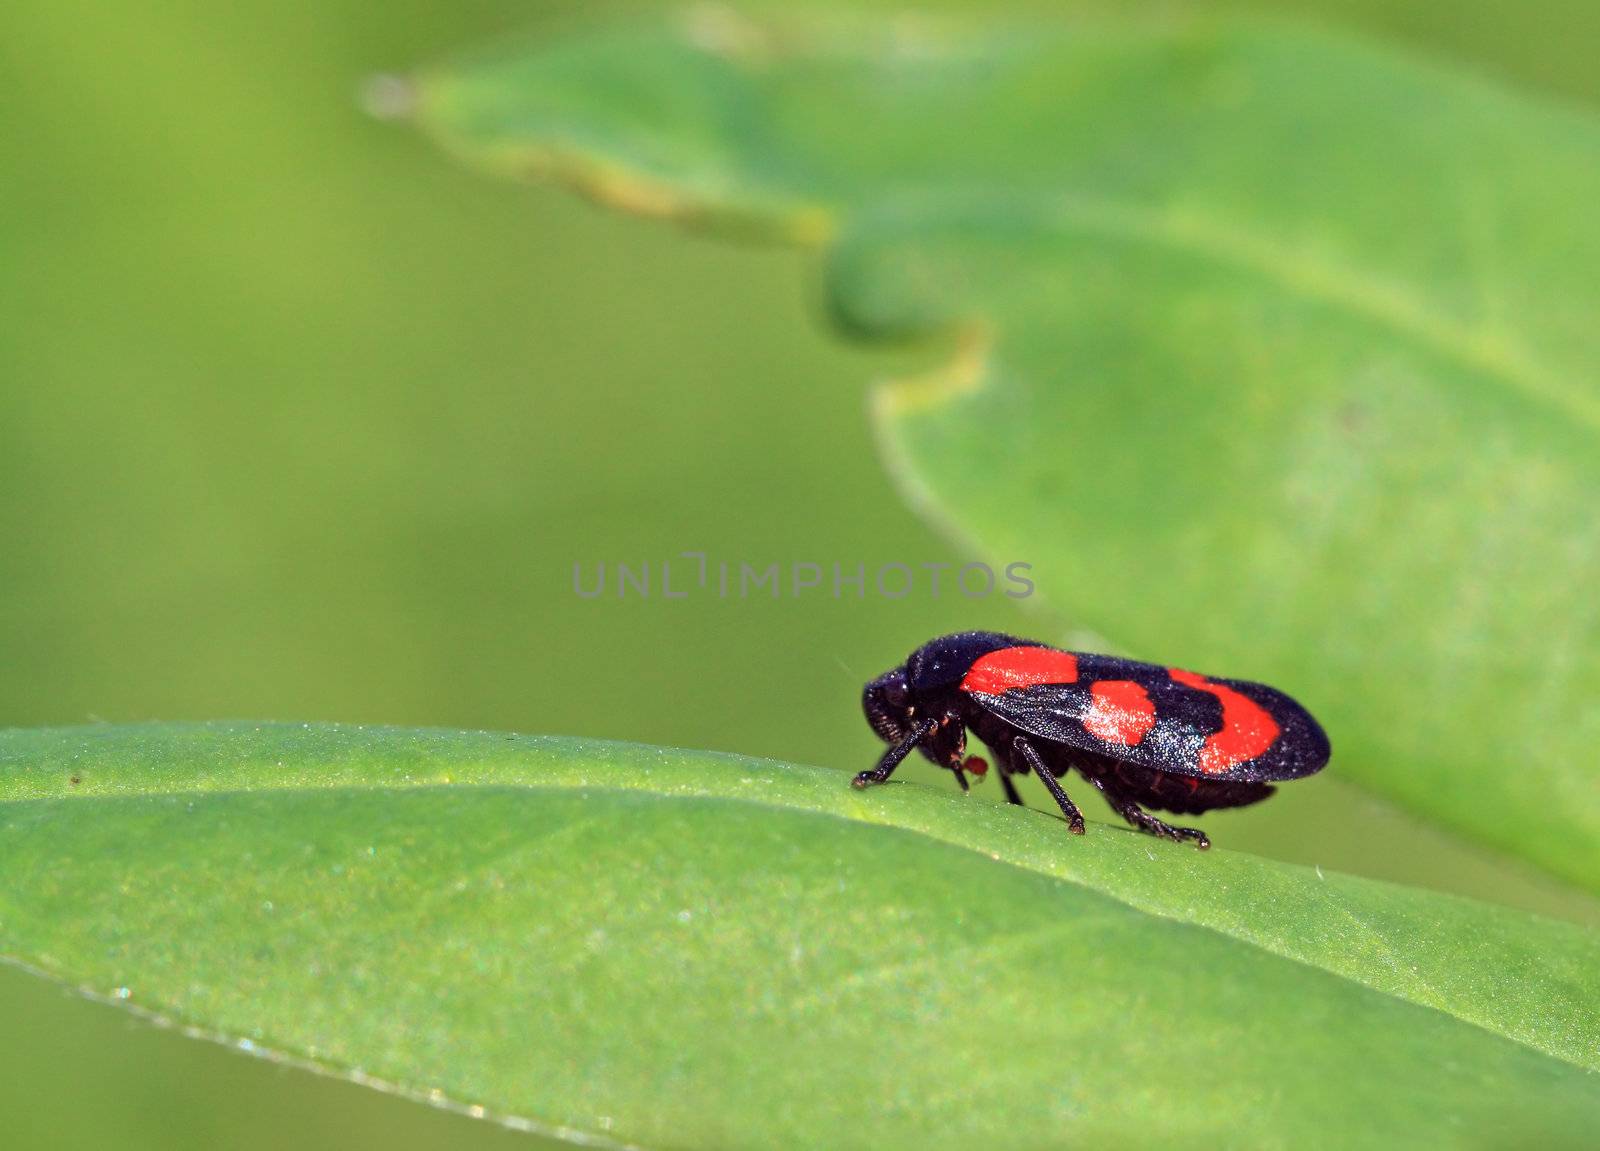 red bug on green sheet by basel101658